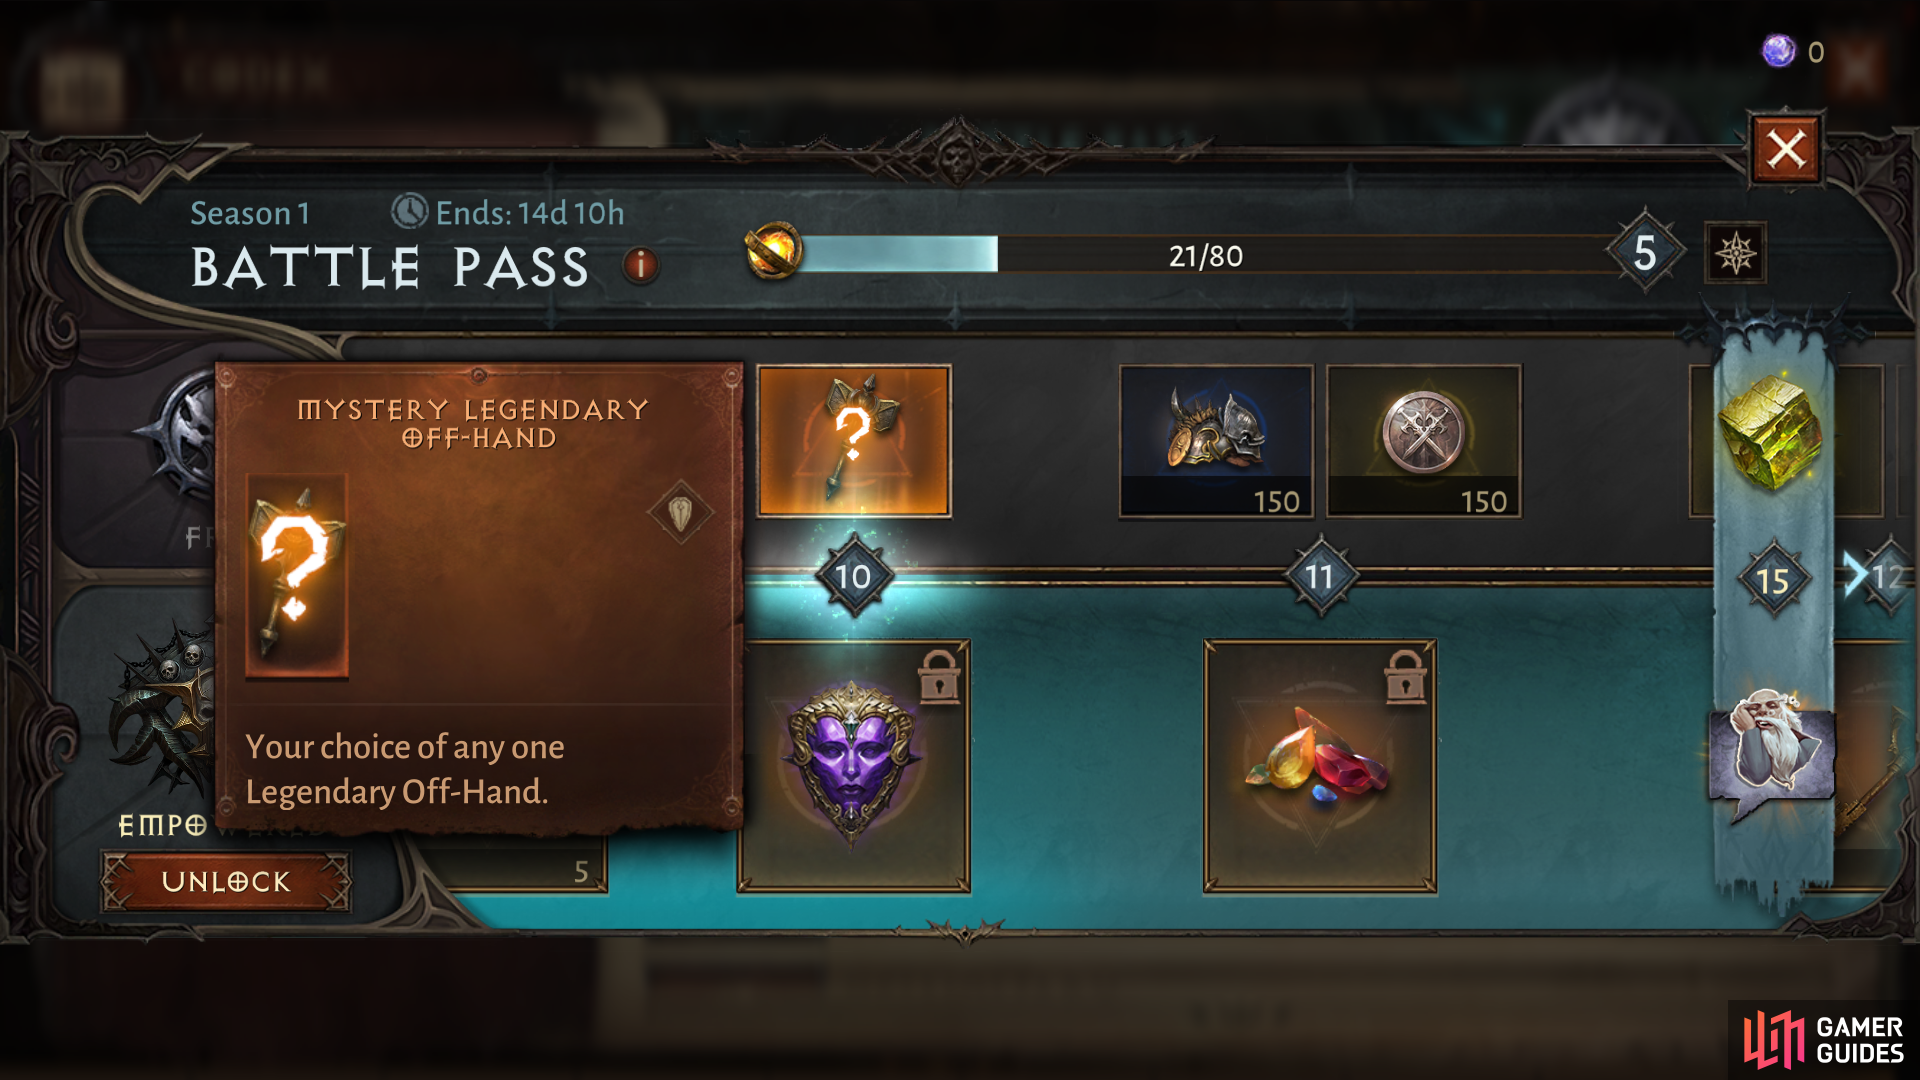 You'll get your first Legendary Off-Hand Weapon upon reaching Rank 10 in the Battle Pass.